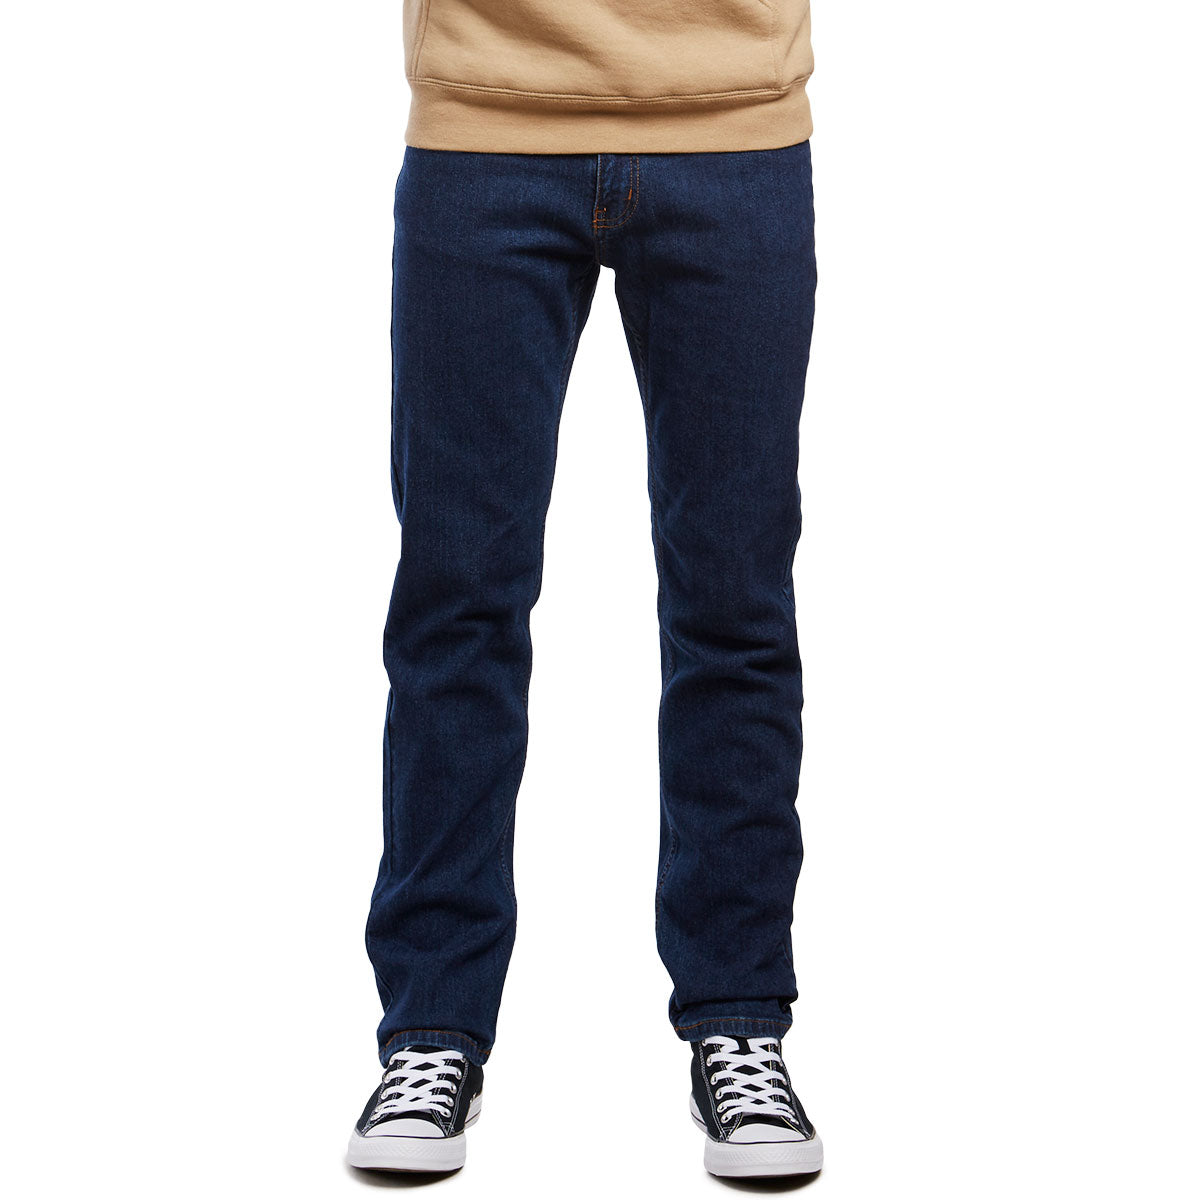 CCS Relaxed Fit Jeans - Dark Rinse image 4